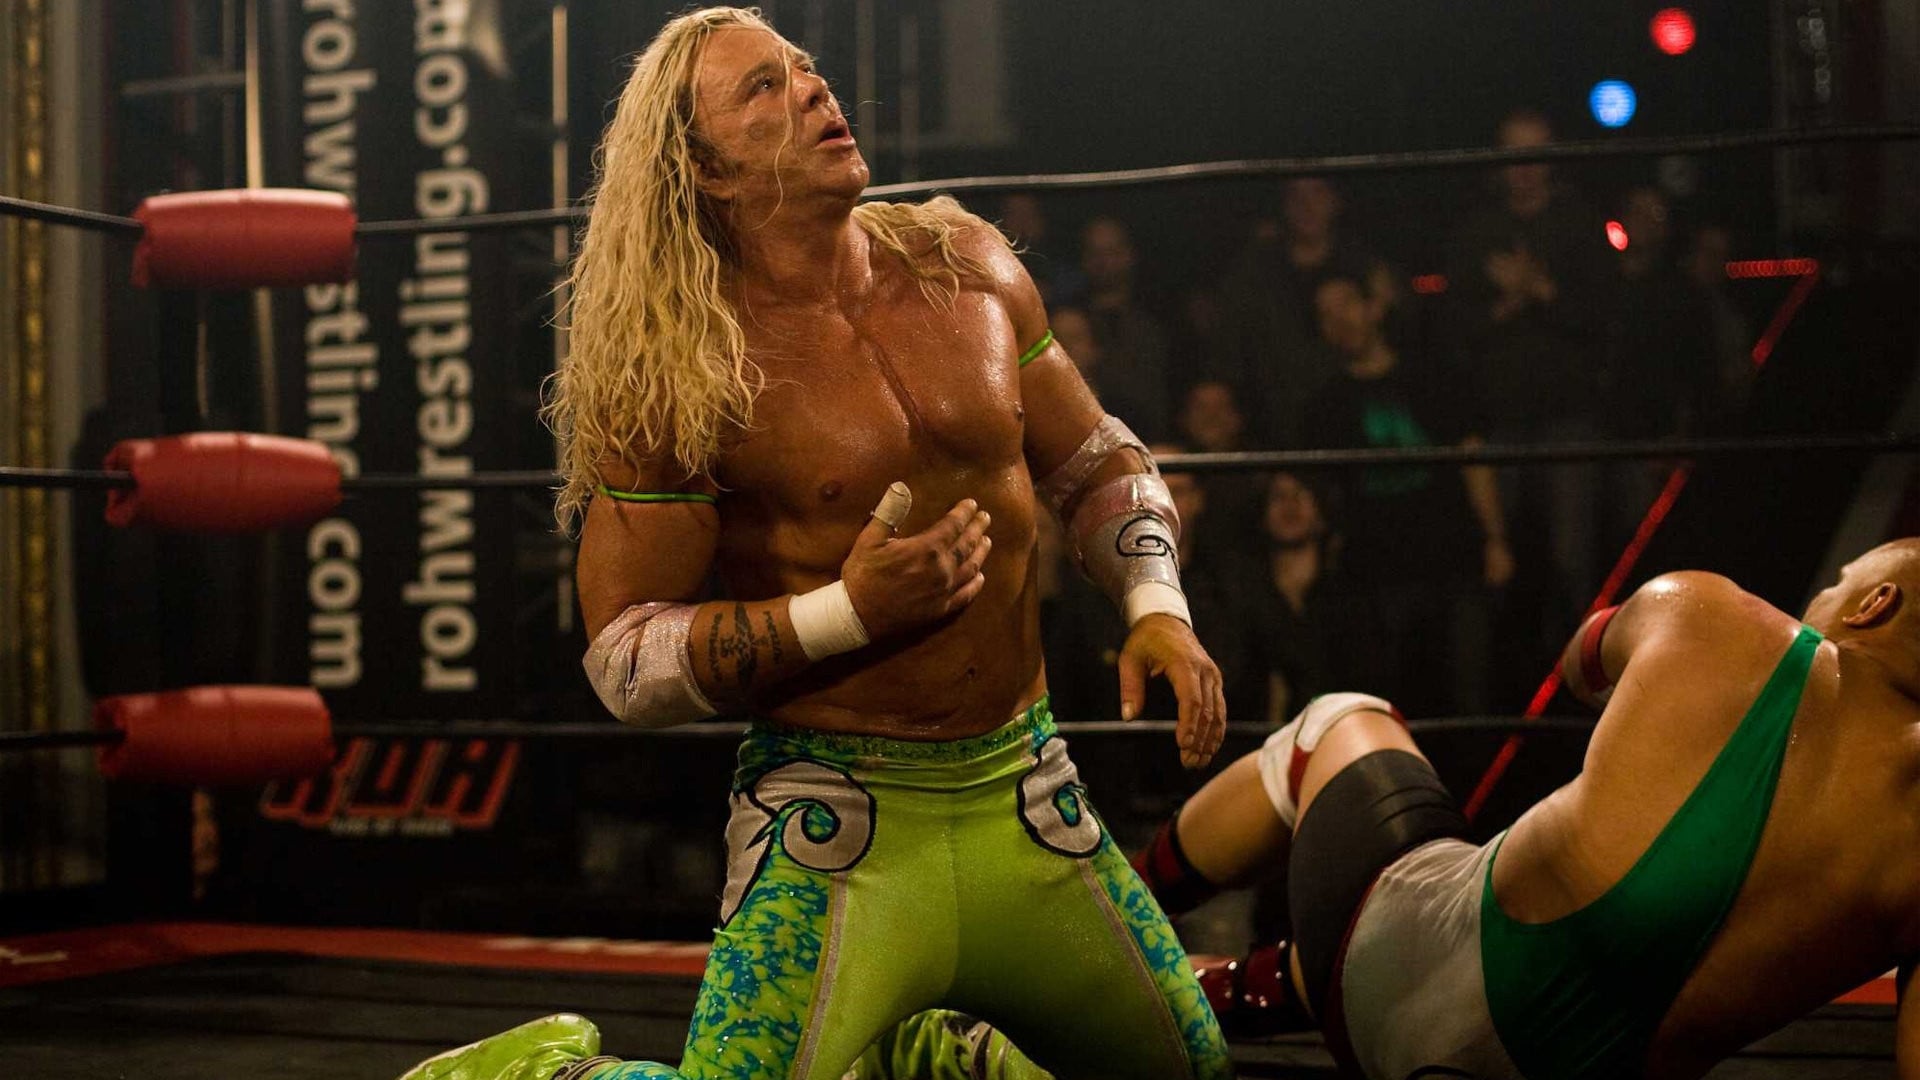 Screencap from the Movie The Wrestler showing a middle aged man with long blode hair, tanned skin and green wrestling gear in the middle of a wrestling ring. He is holding his sternum and looking up. His opponent is laying next to him on the mat in the backgrund of the shot.